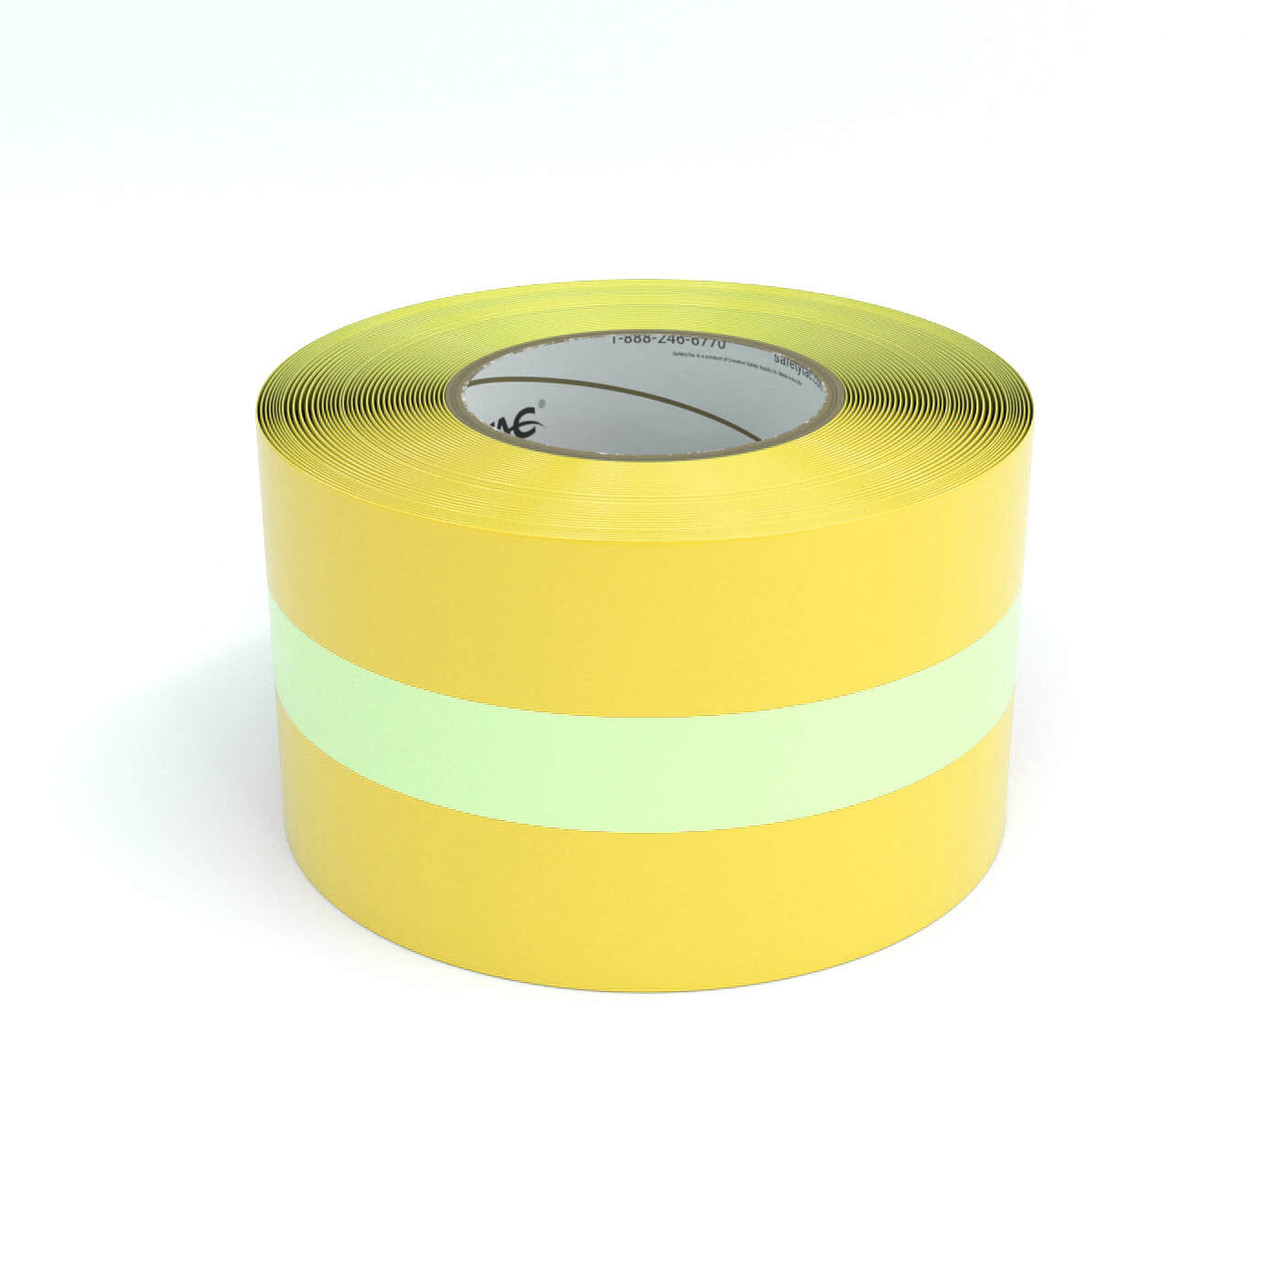 2 Floor Marking Tape - 2 Aisle Marking Tape - Eco Safety Products